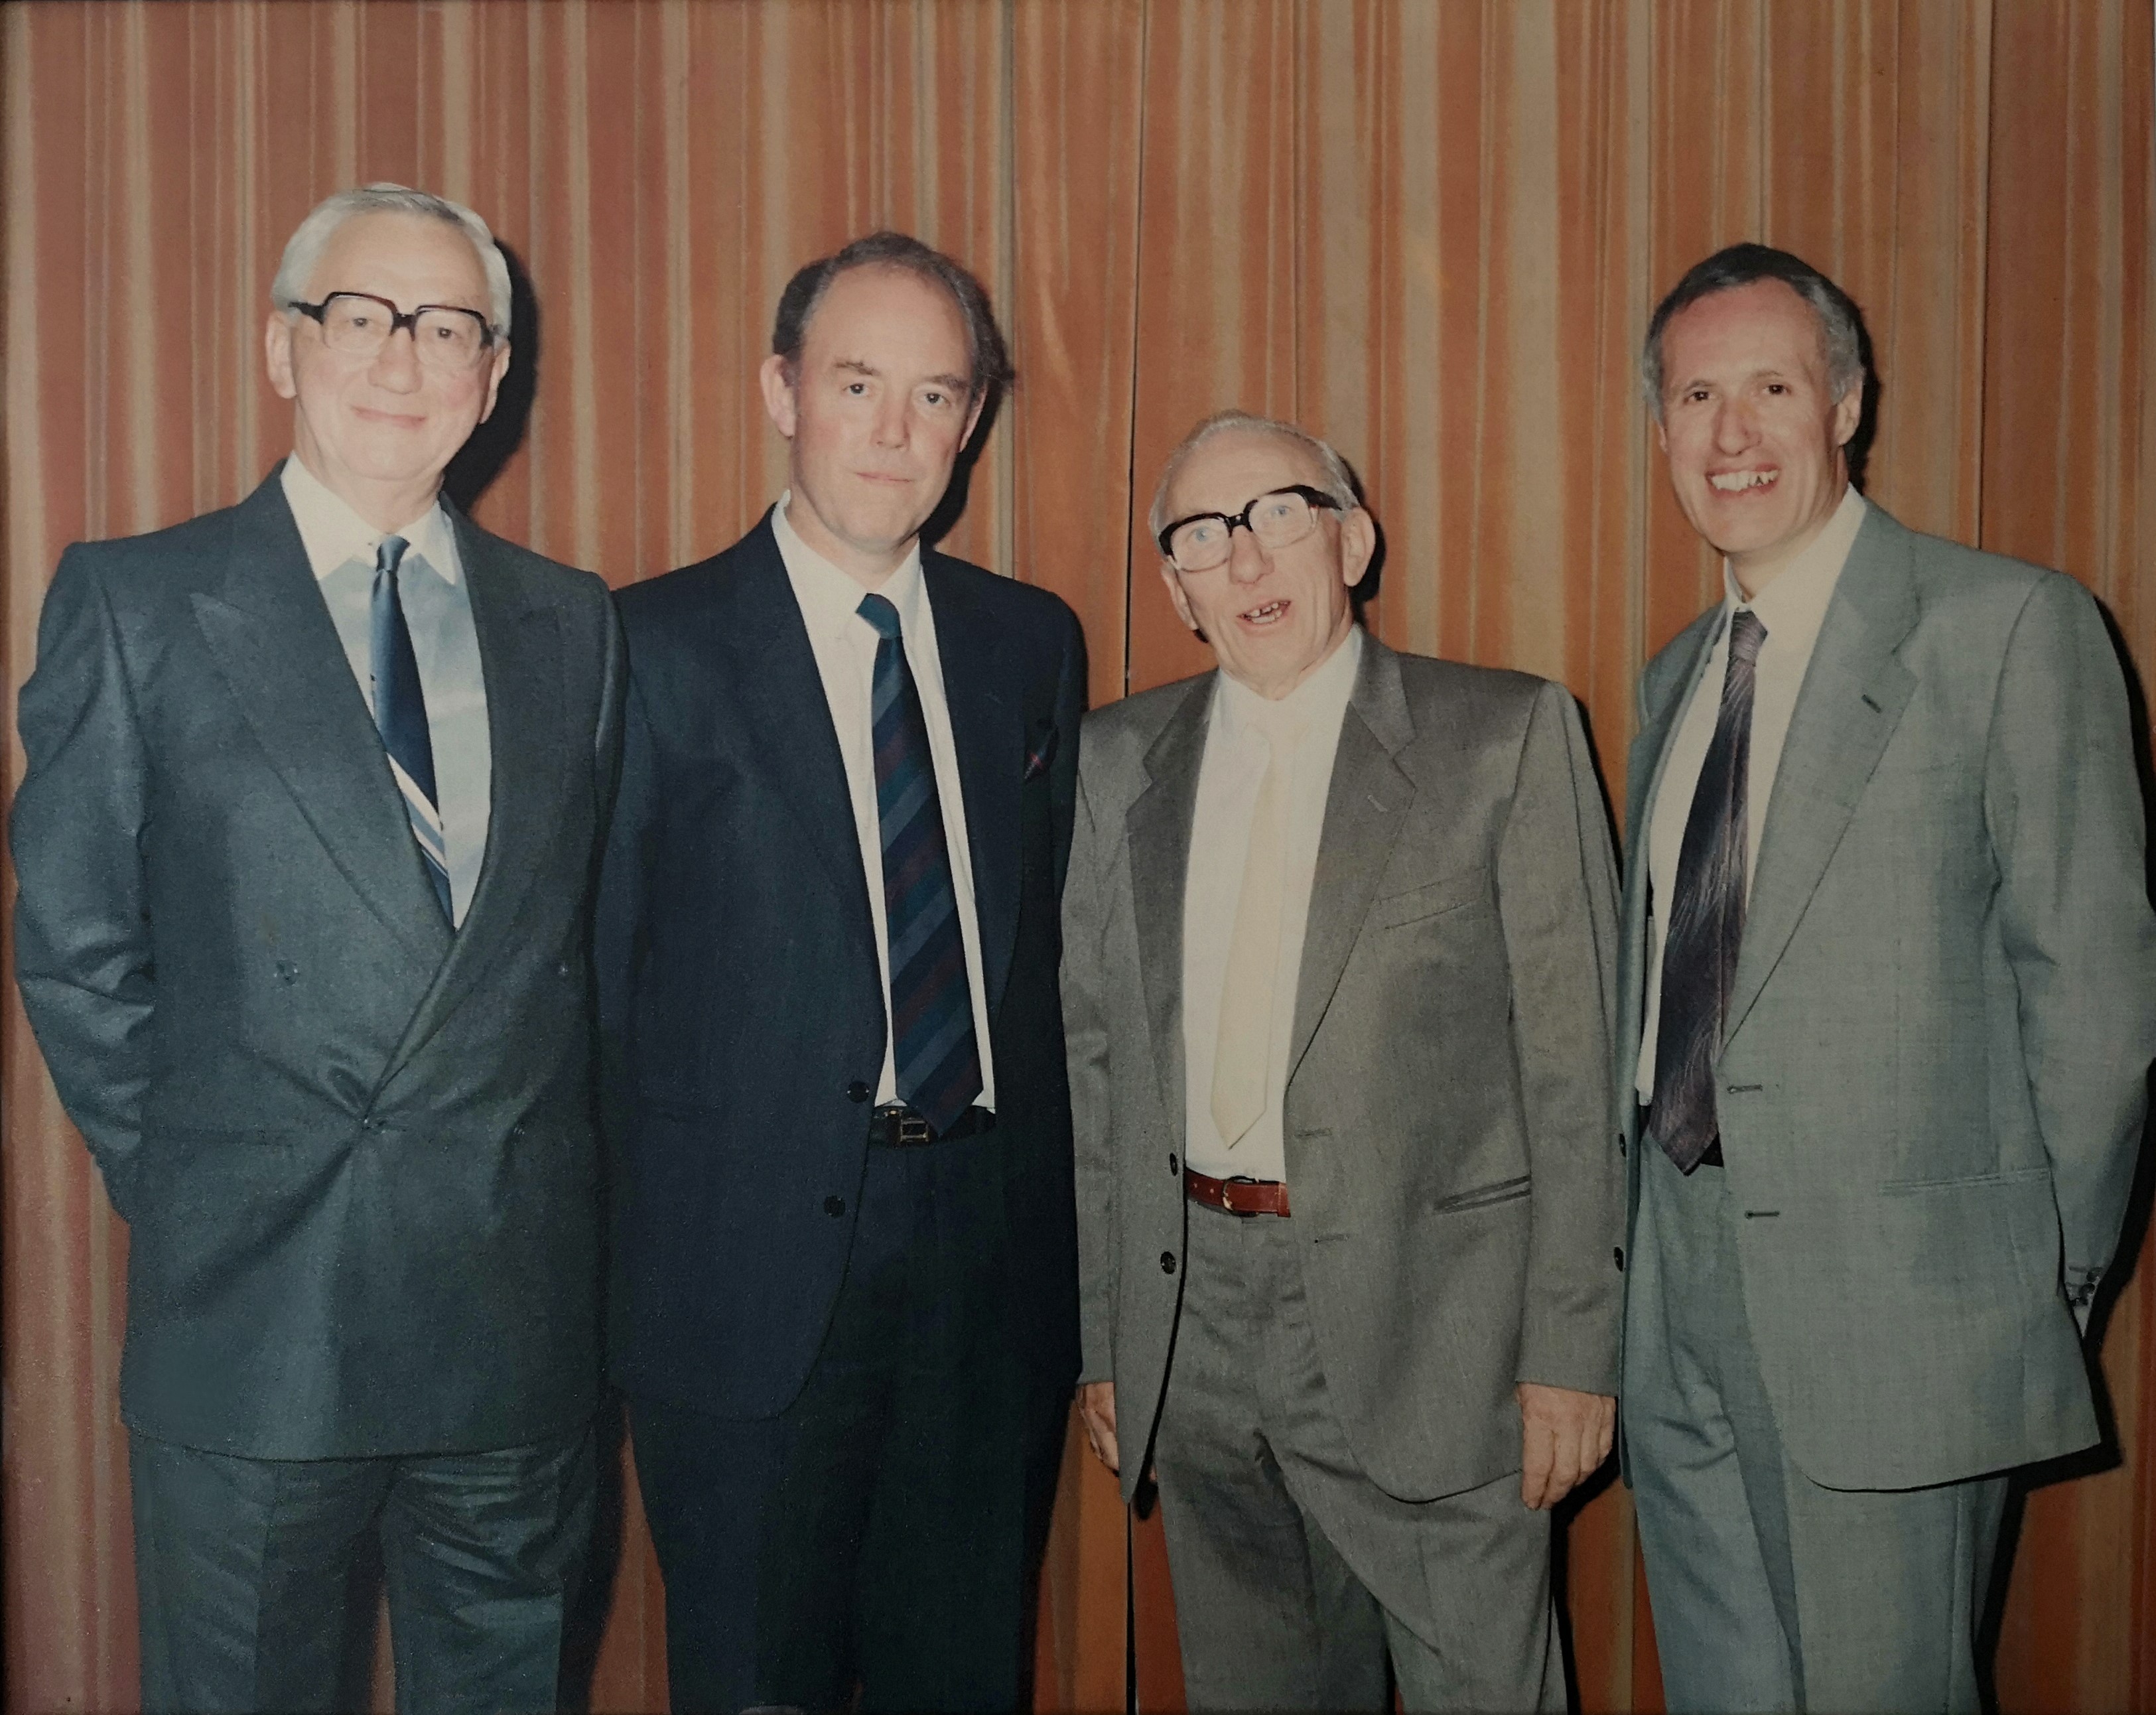 Founding directors of The Analytical Development Company